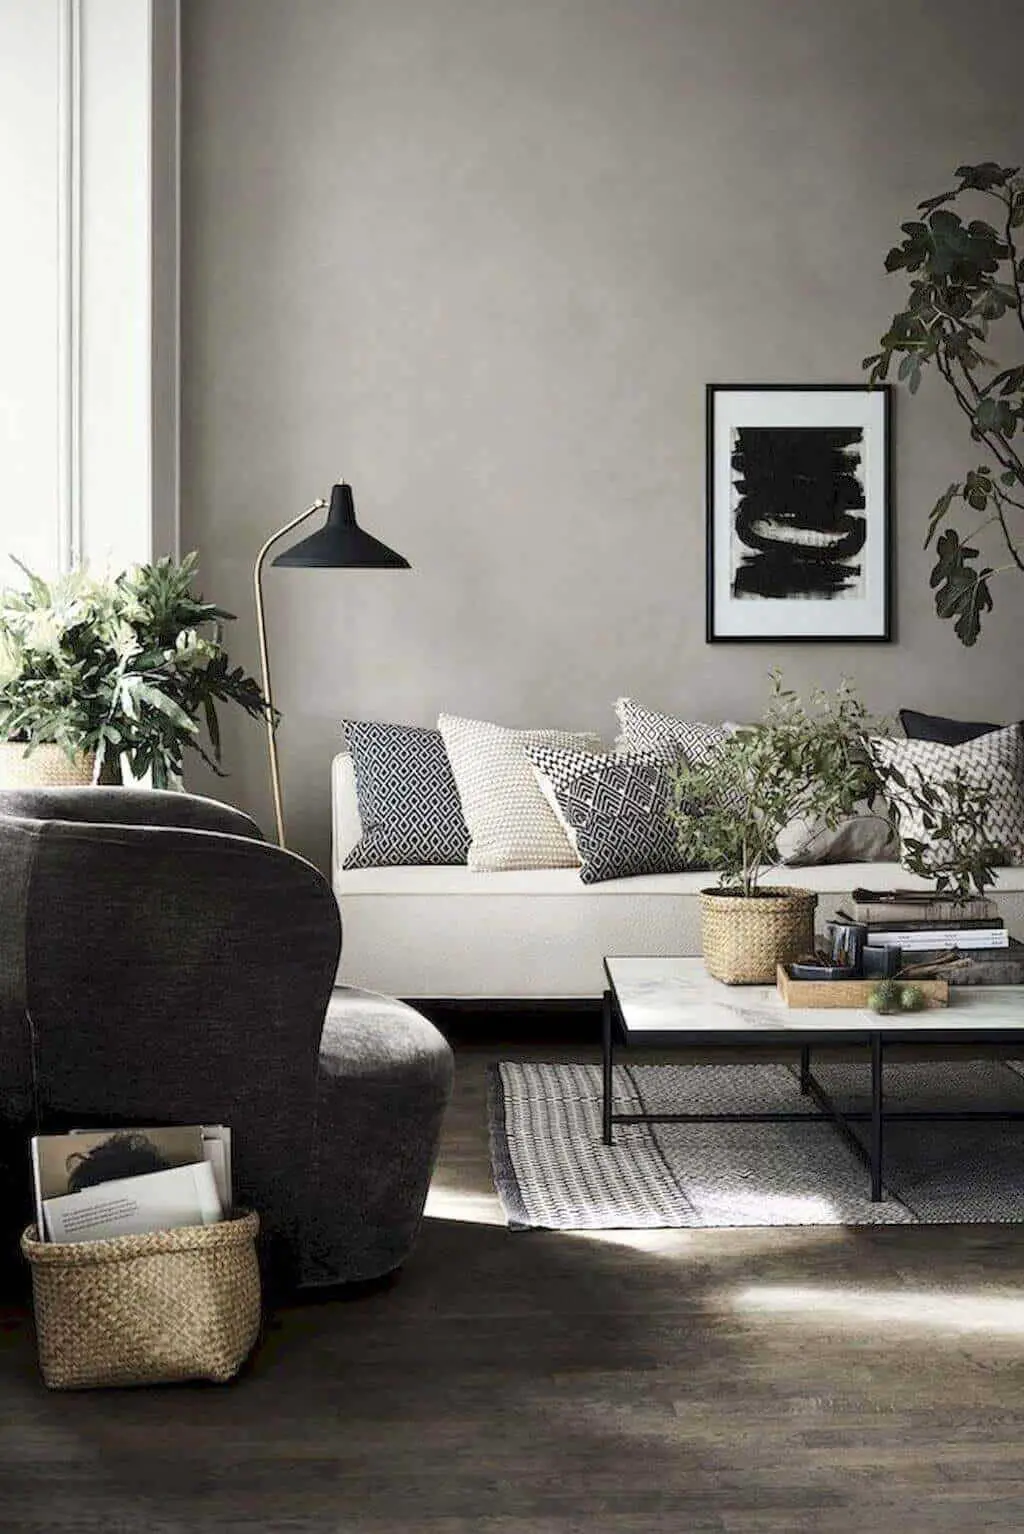 Let us show you some Scandinavian living room design ideas for you to get the gist of it and, who knows, find your new living room décor. For more design or decor ideas go to betterthathome.com